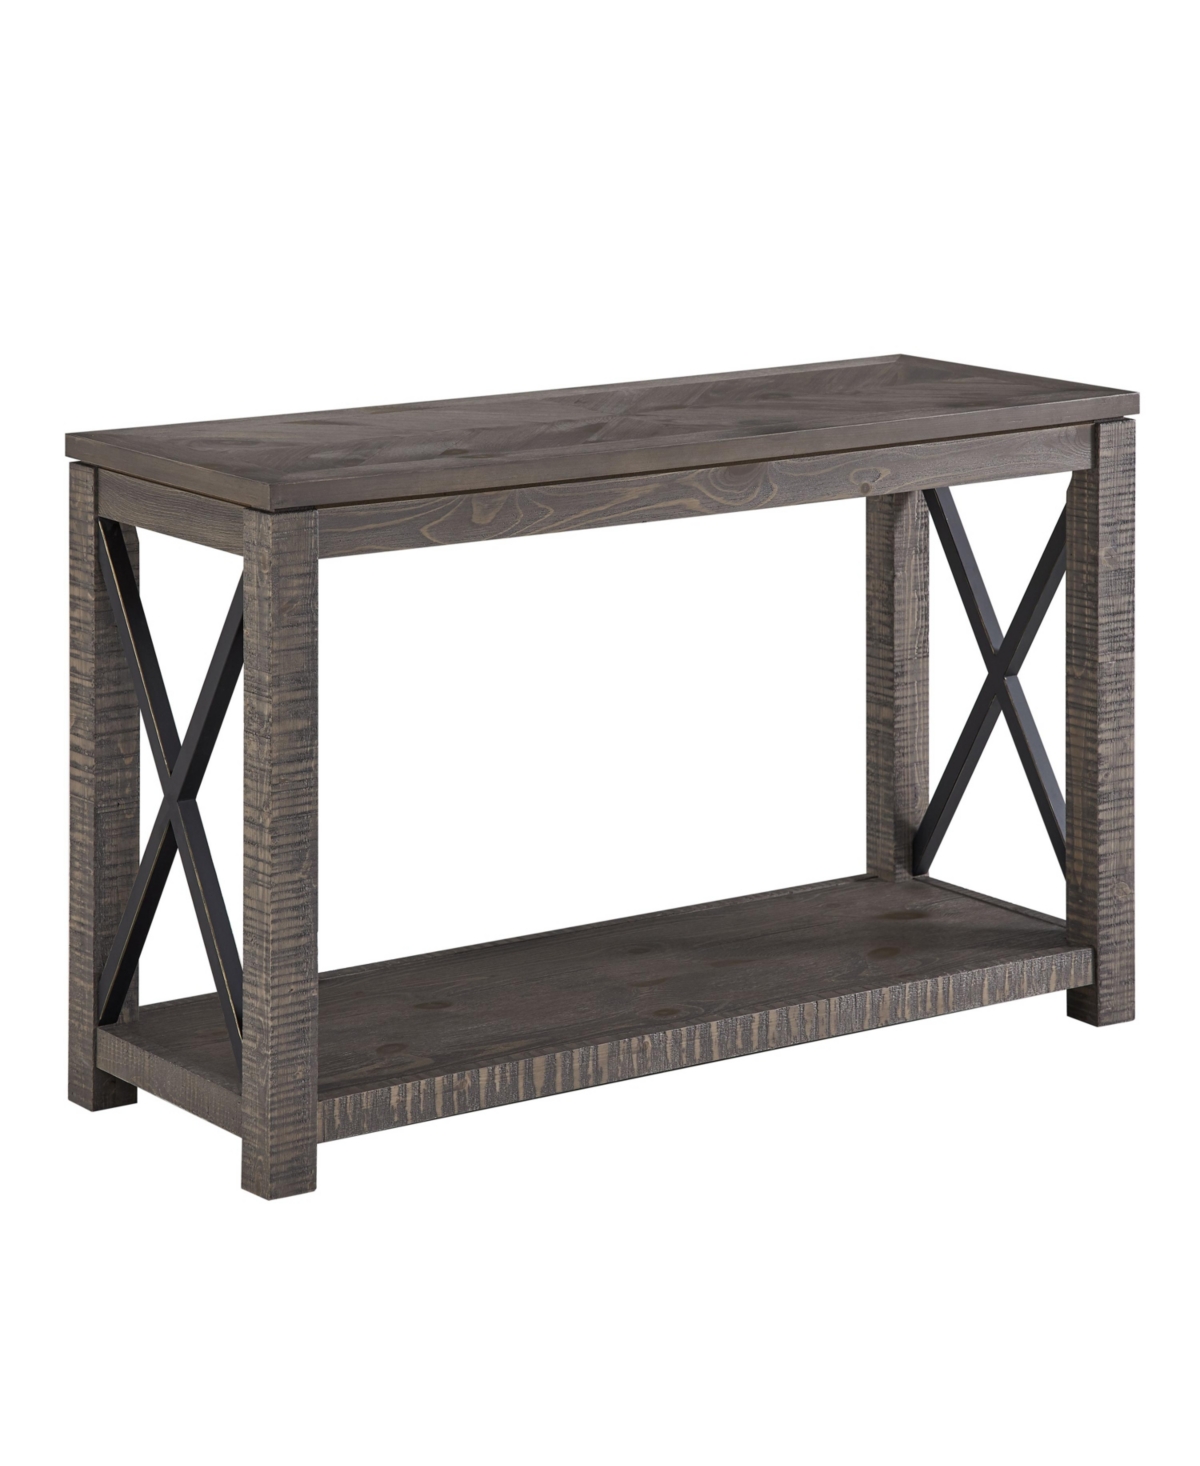 Steve Silver Dexter 48 " Wide Wooden Sofa Table In Driftwood With Ruff-hewn Distressing